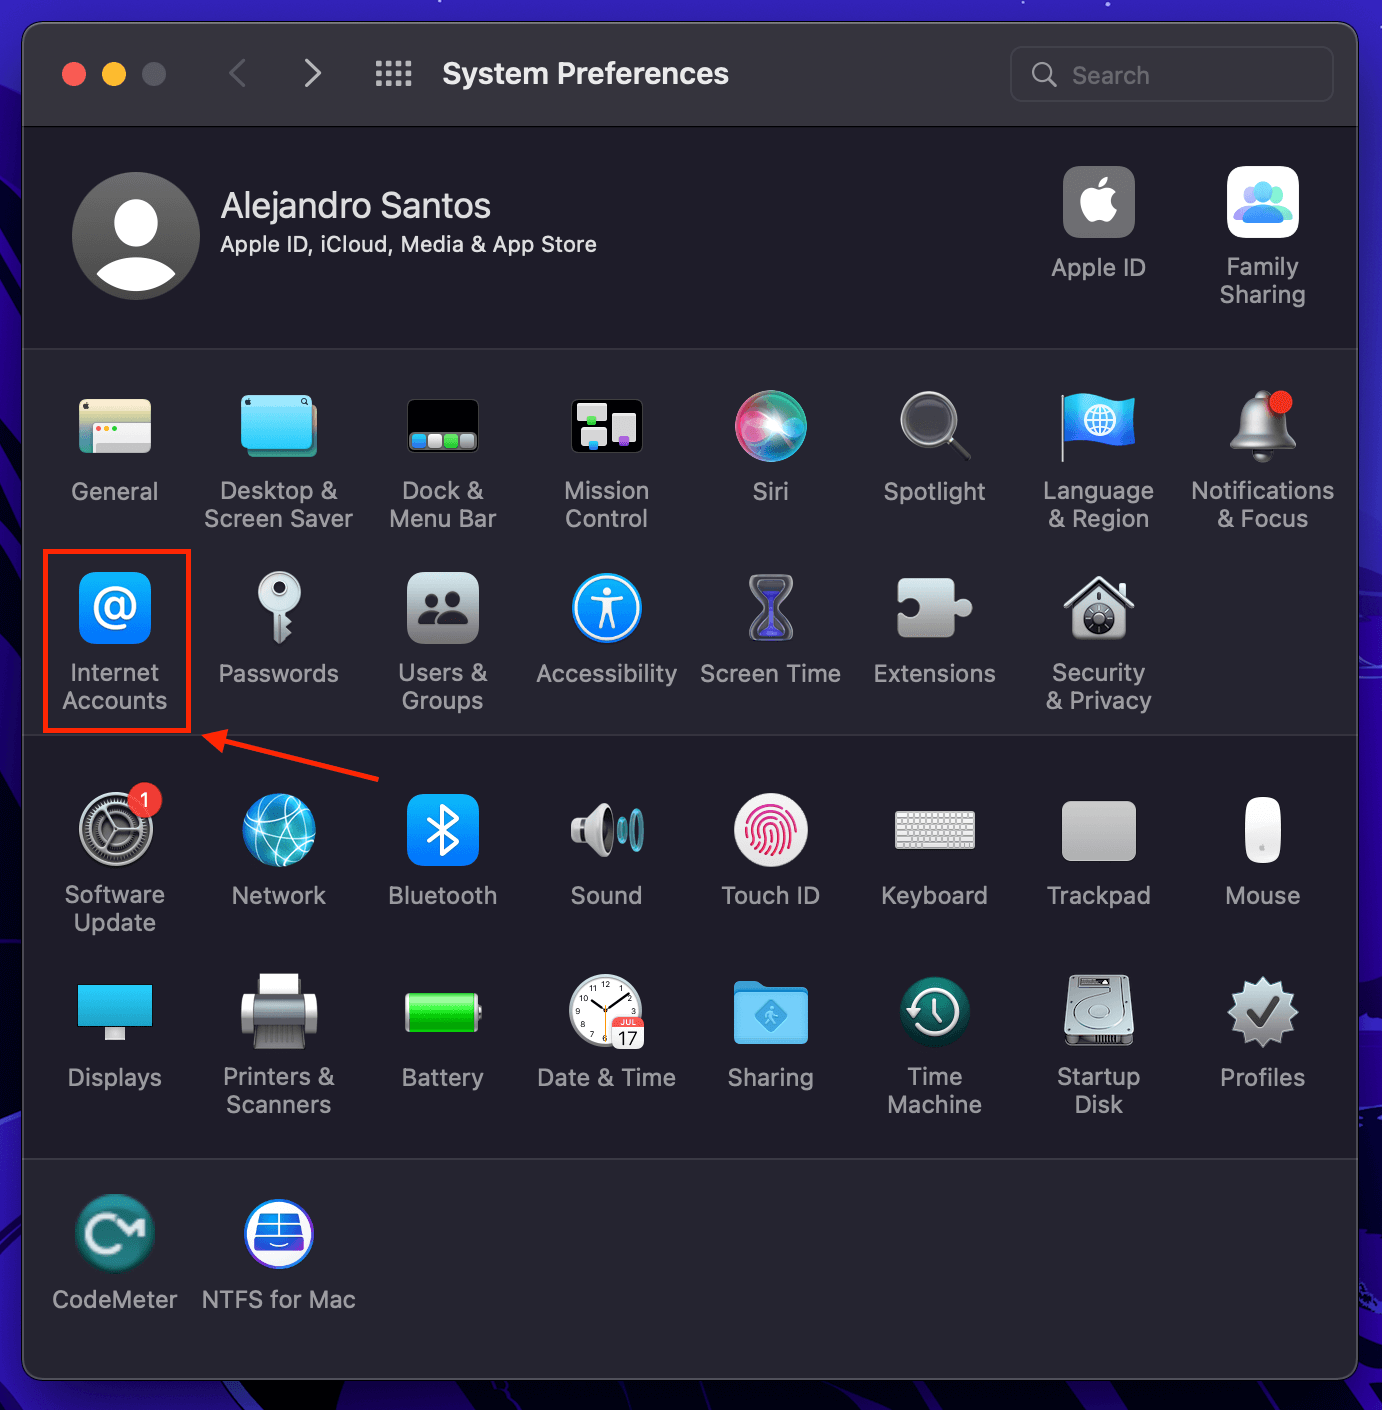 Internet Accounts app in the System Preferences window